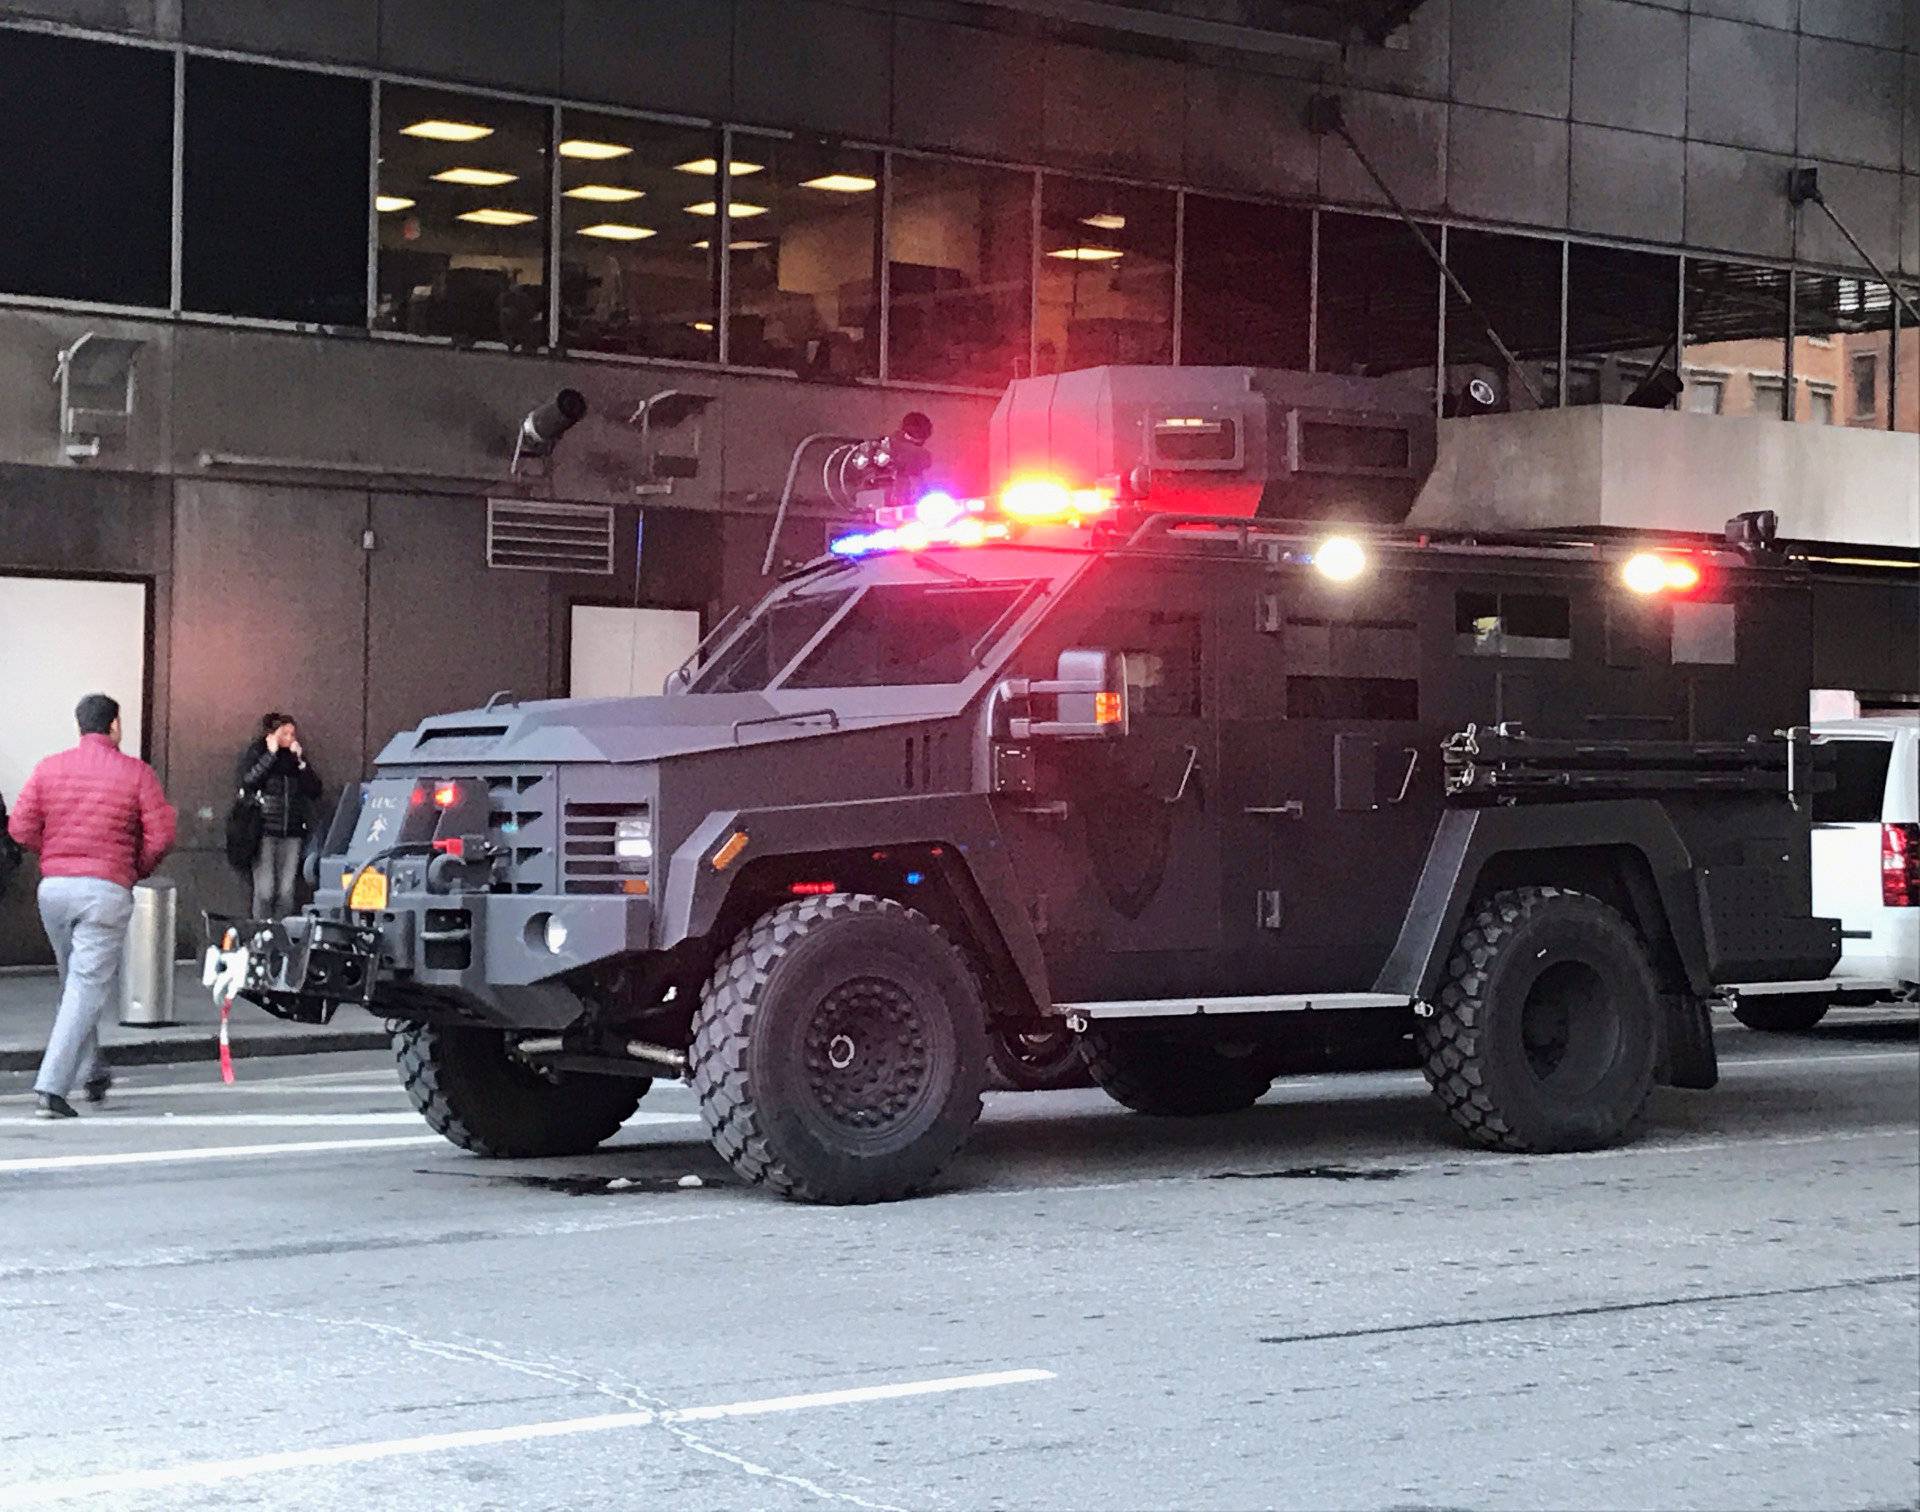 An armoured police truck occupies the street outside of the New York Port Authority in New York City after reports of an explosion